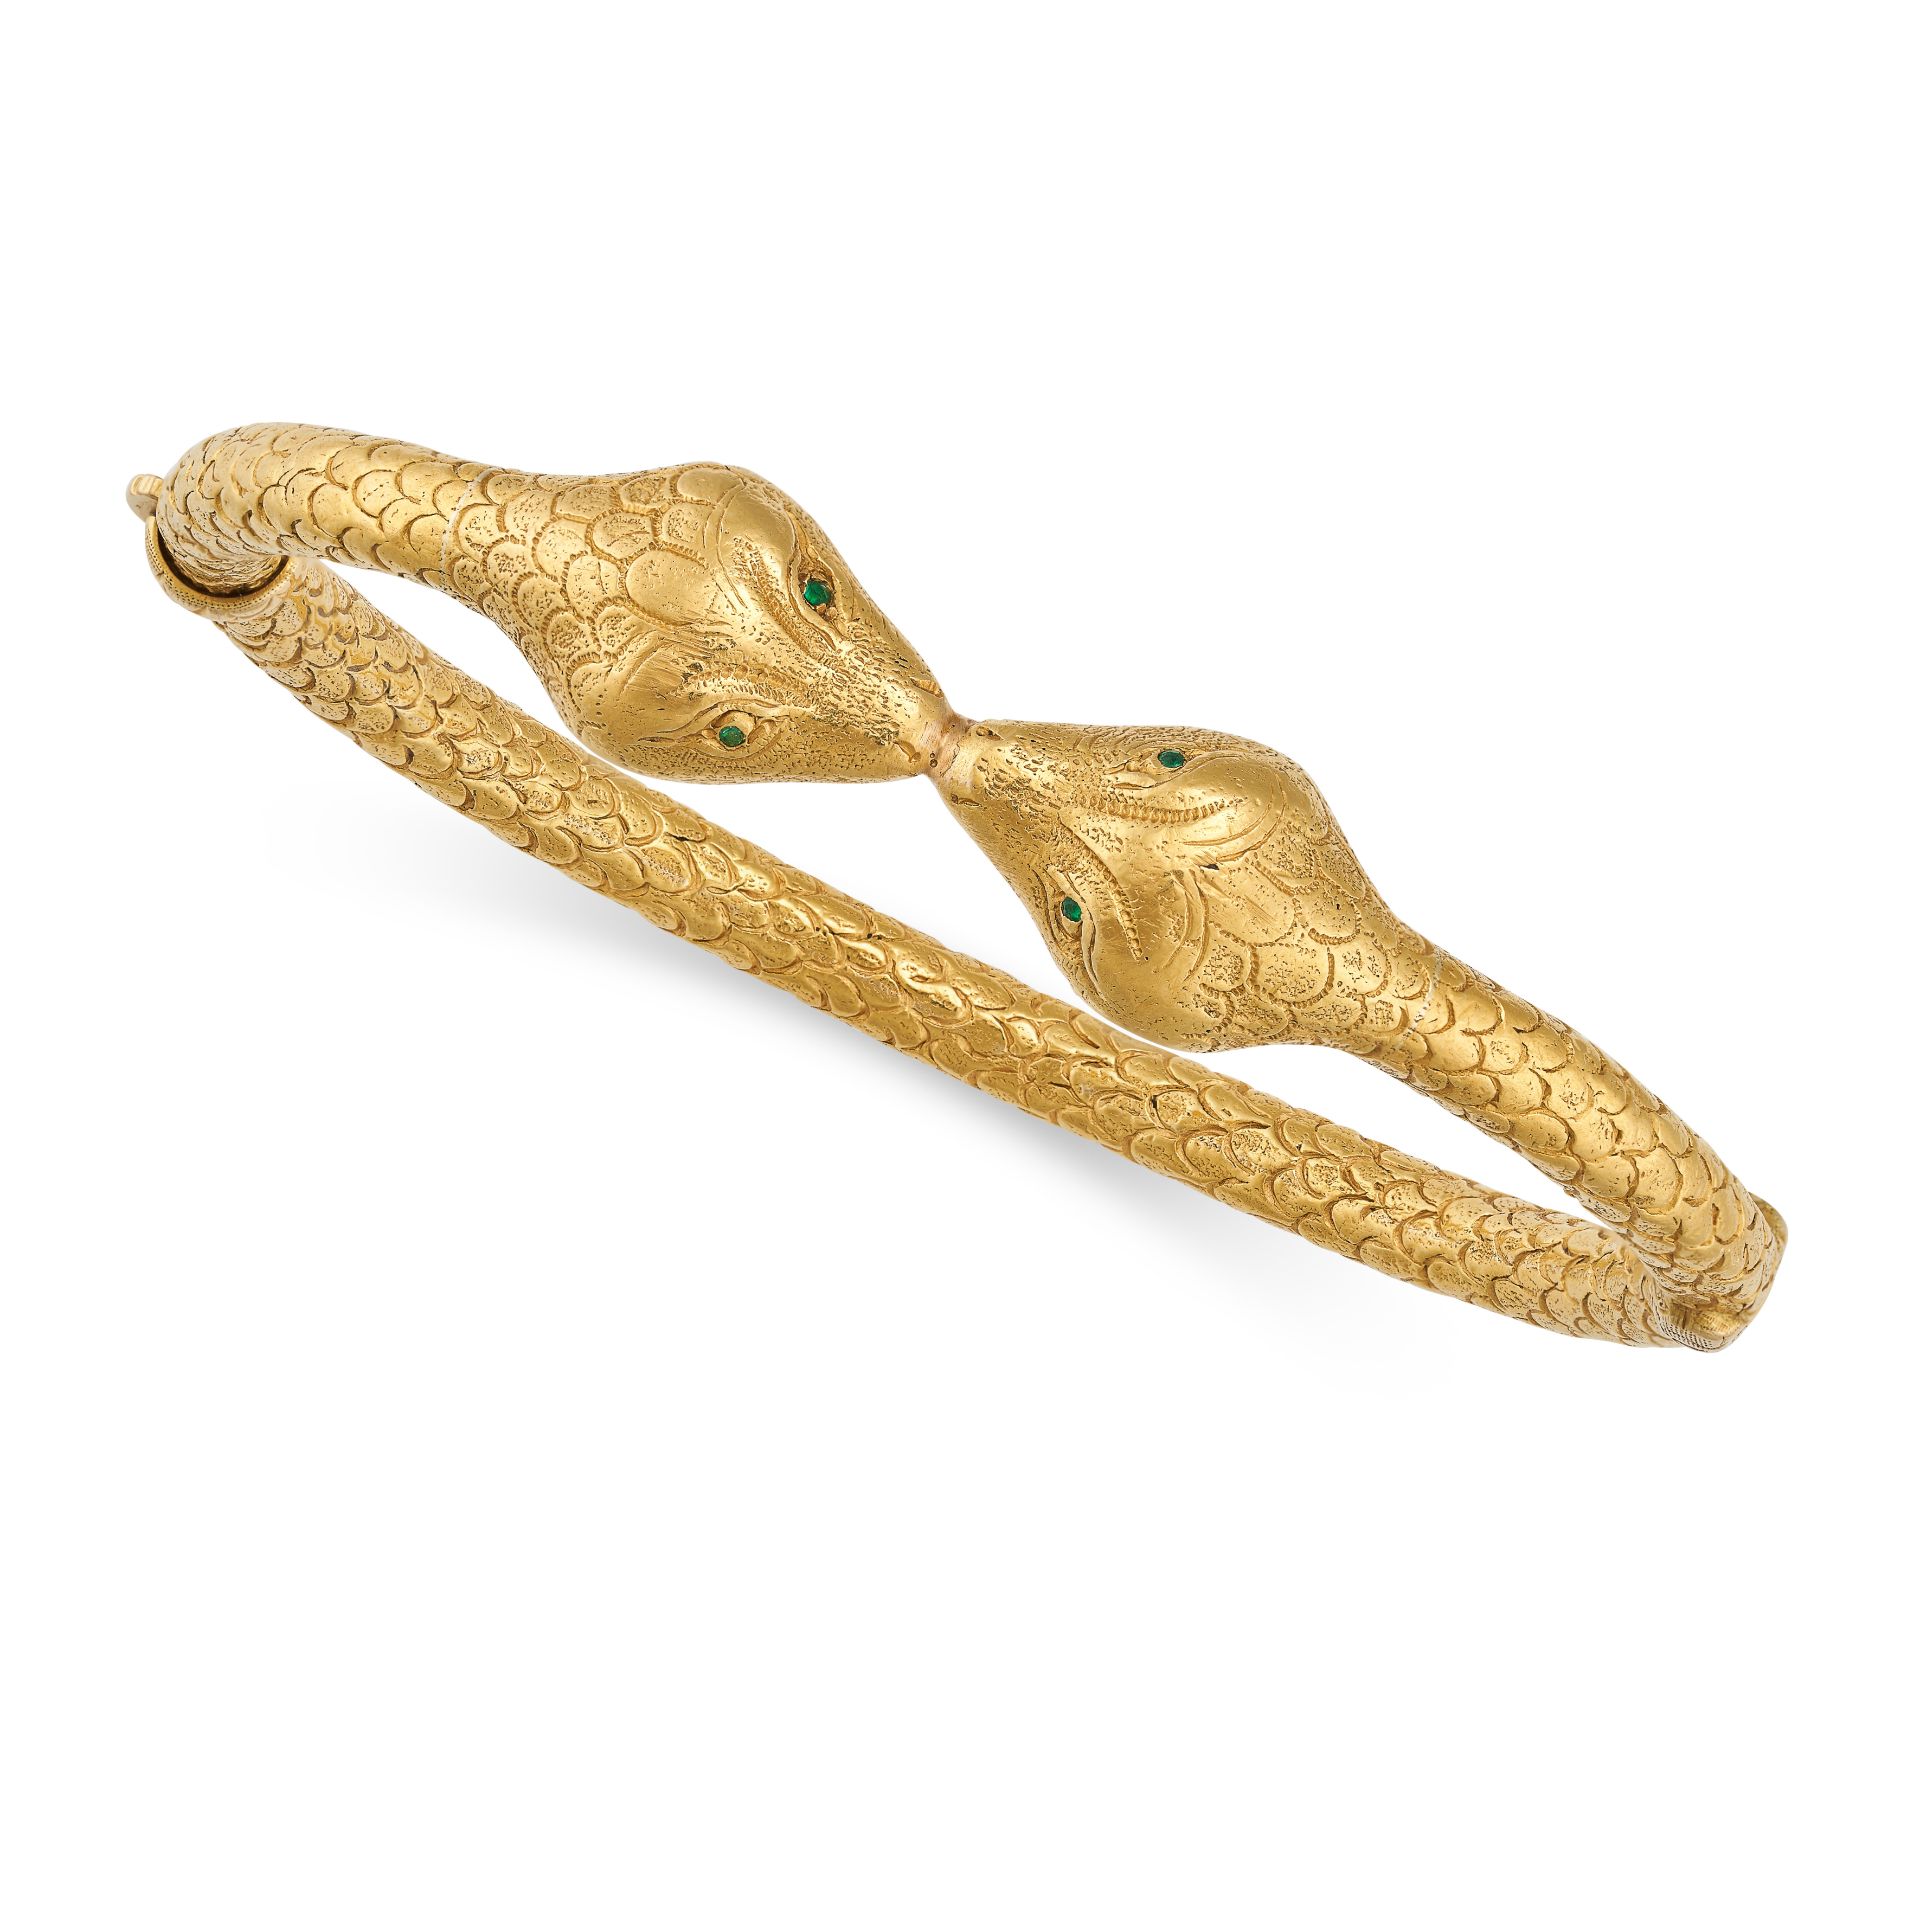 AN EMERALD SNAKE BANGLE in high carat yellow gold, modelled as a two headed snake, each head set ...